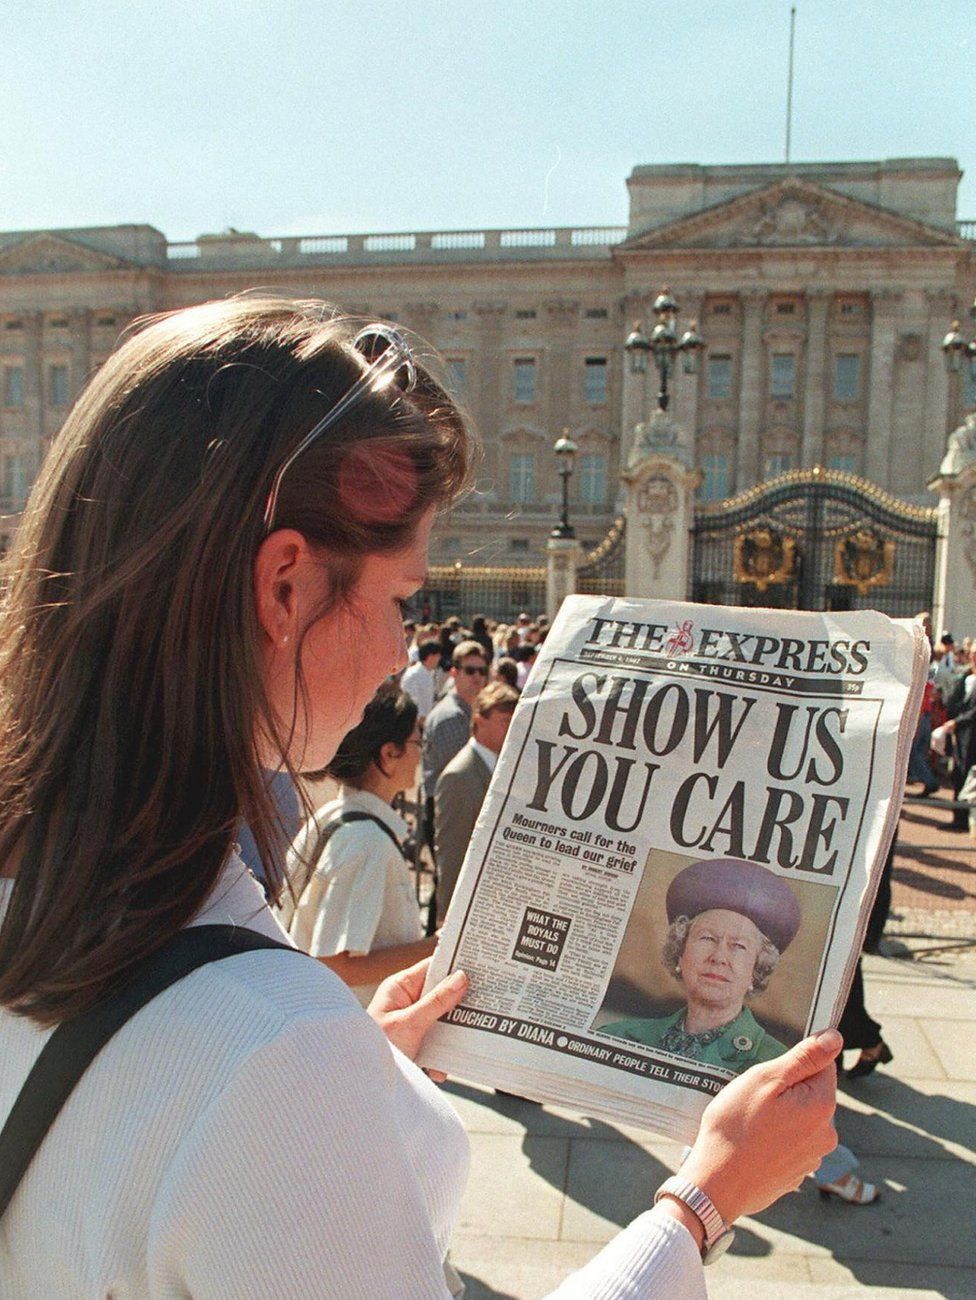 A woman reads a newspaper headline from 4 September 1997, criticising the Queen's silence since the death of Diana, Princess of Wales, the previous weekend